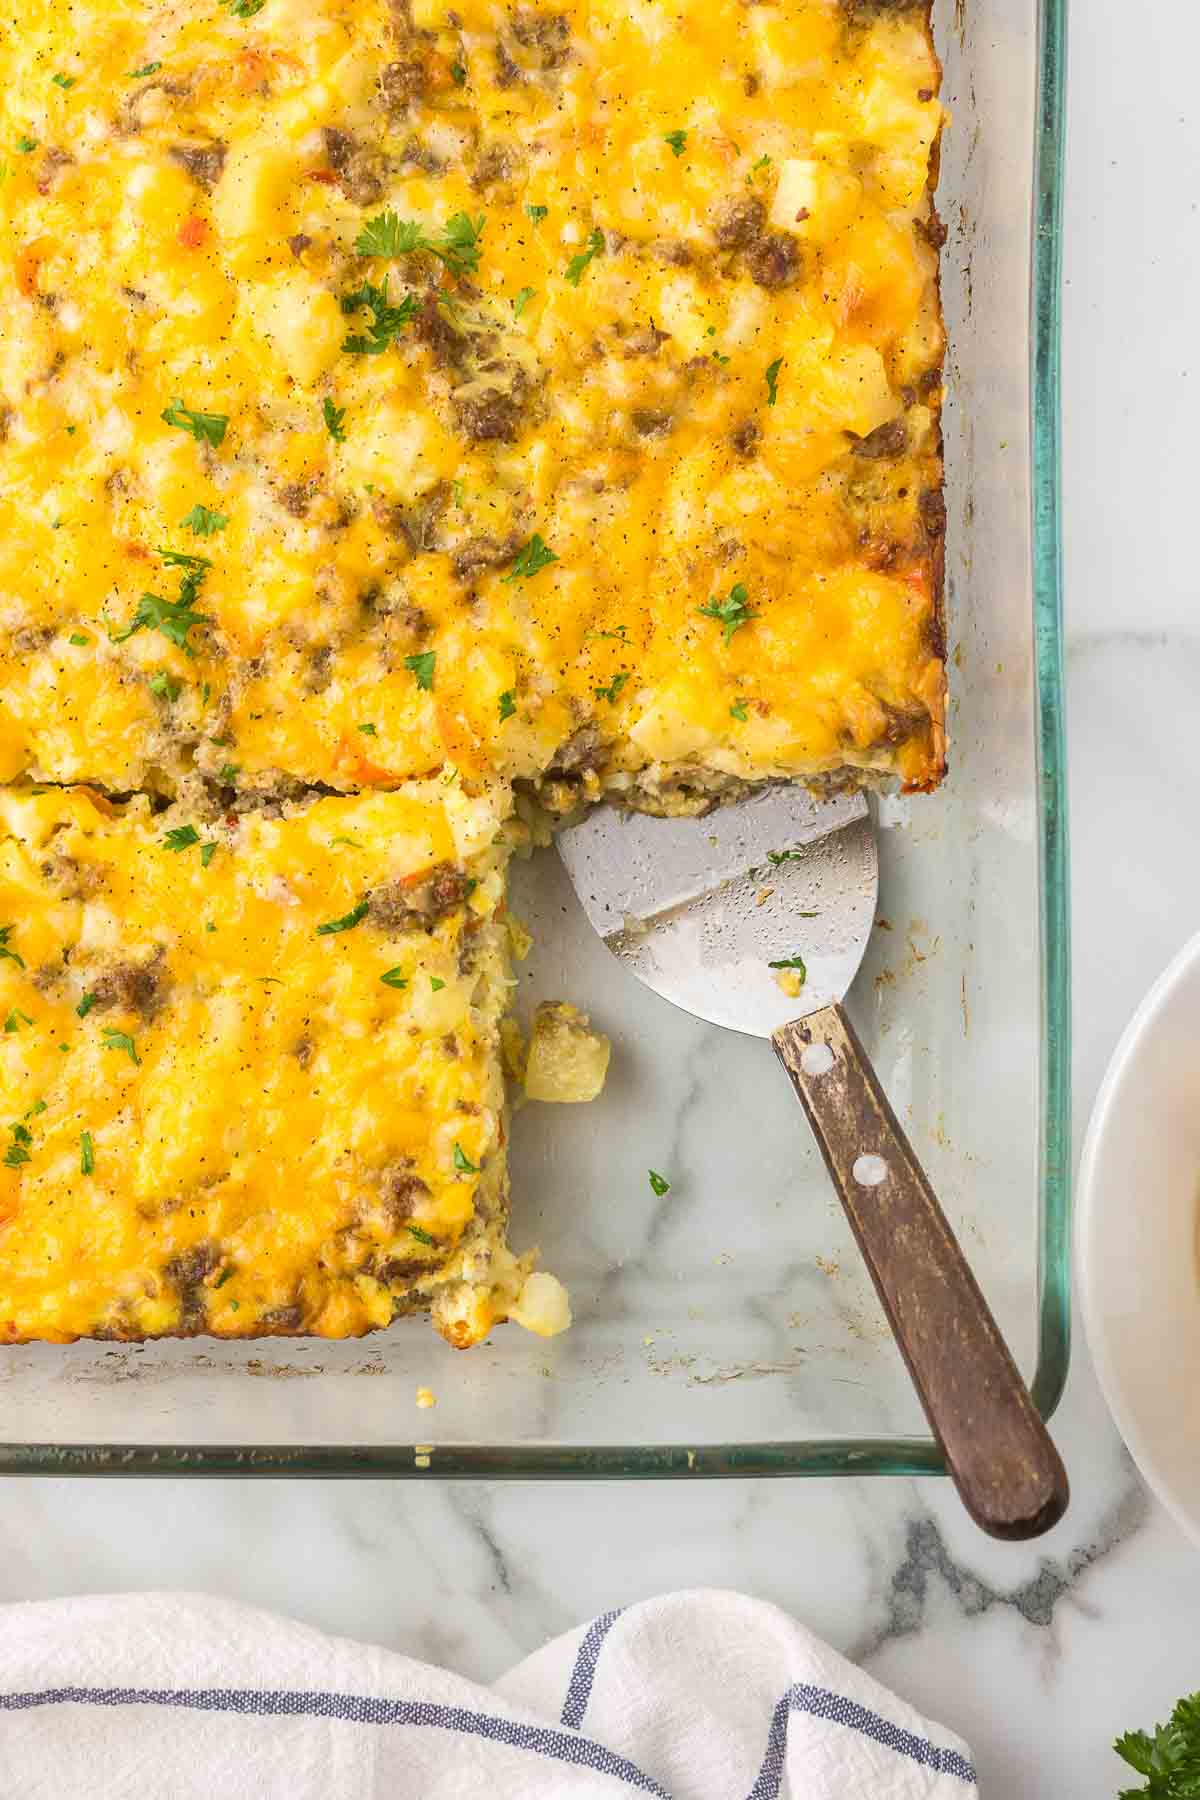 Breakfast casserole in a clear baking dish with a serving spatula.